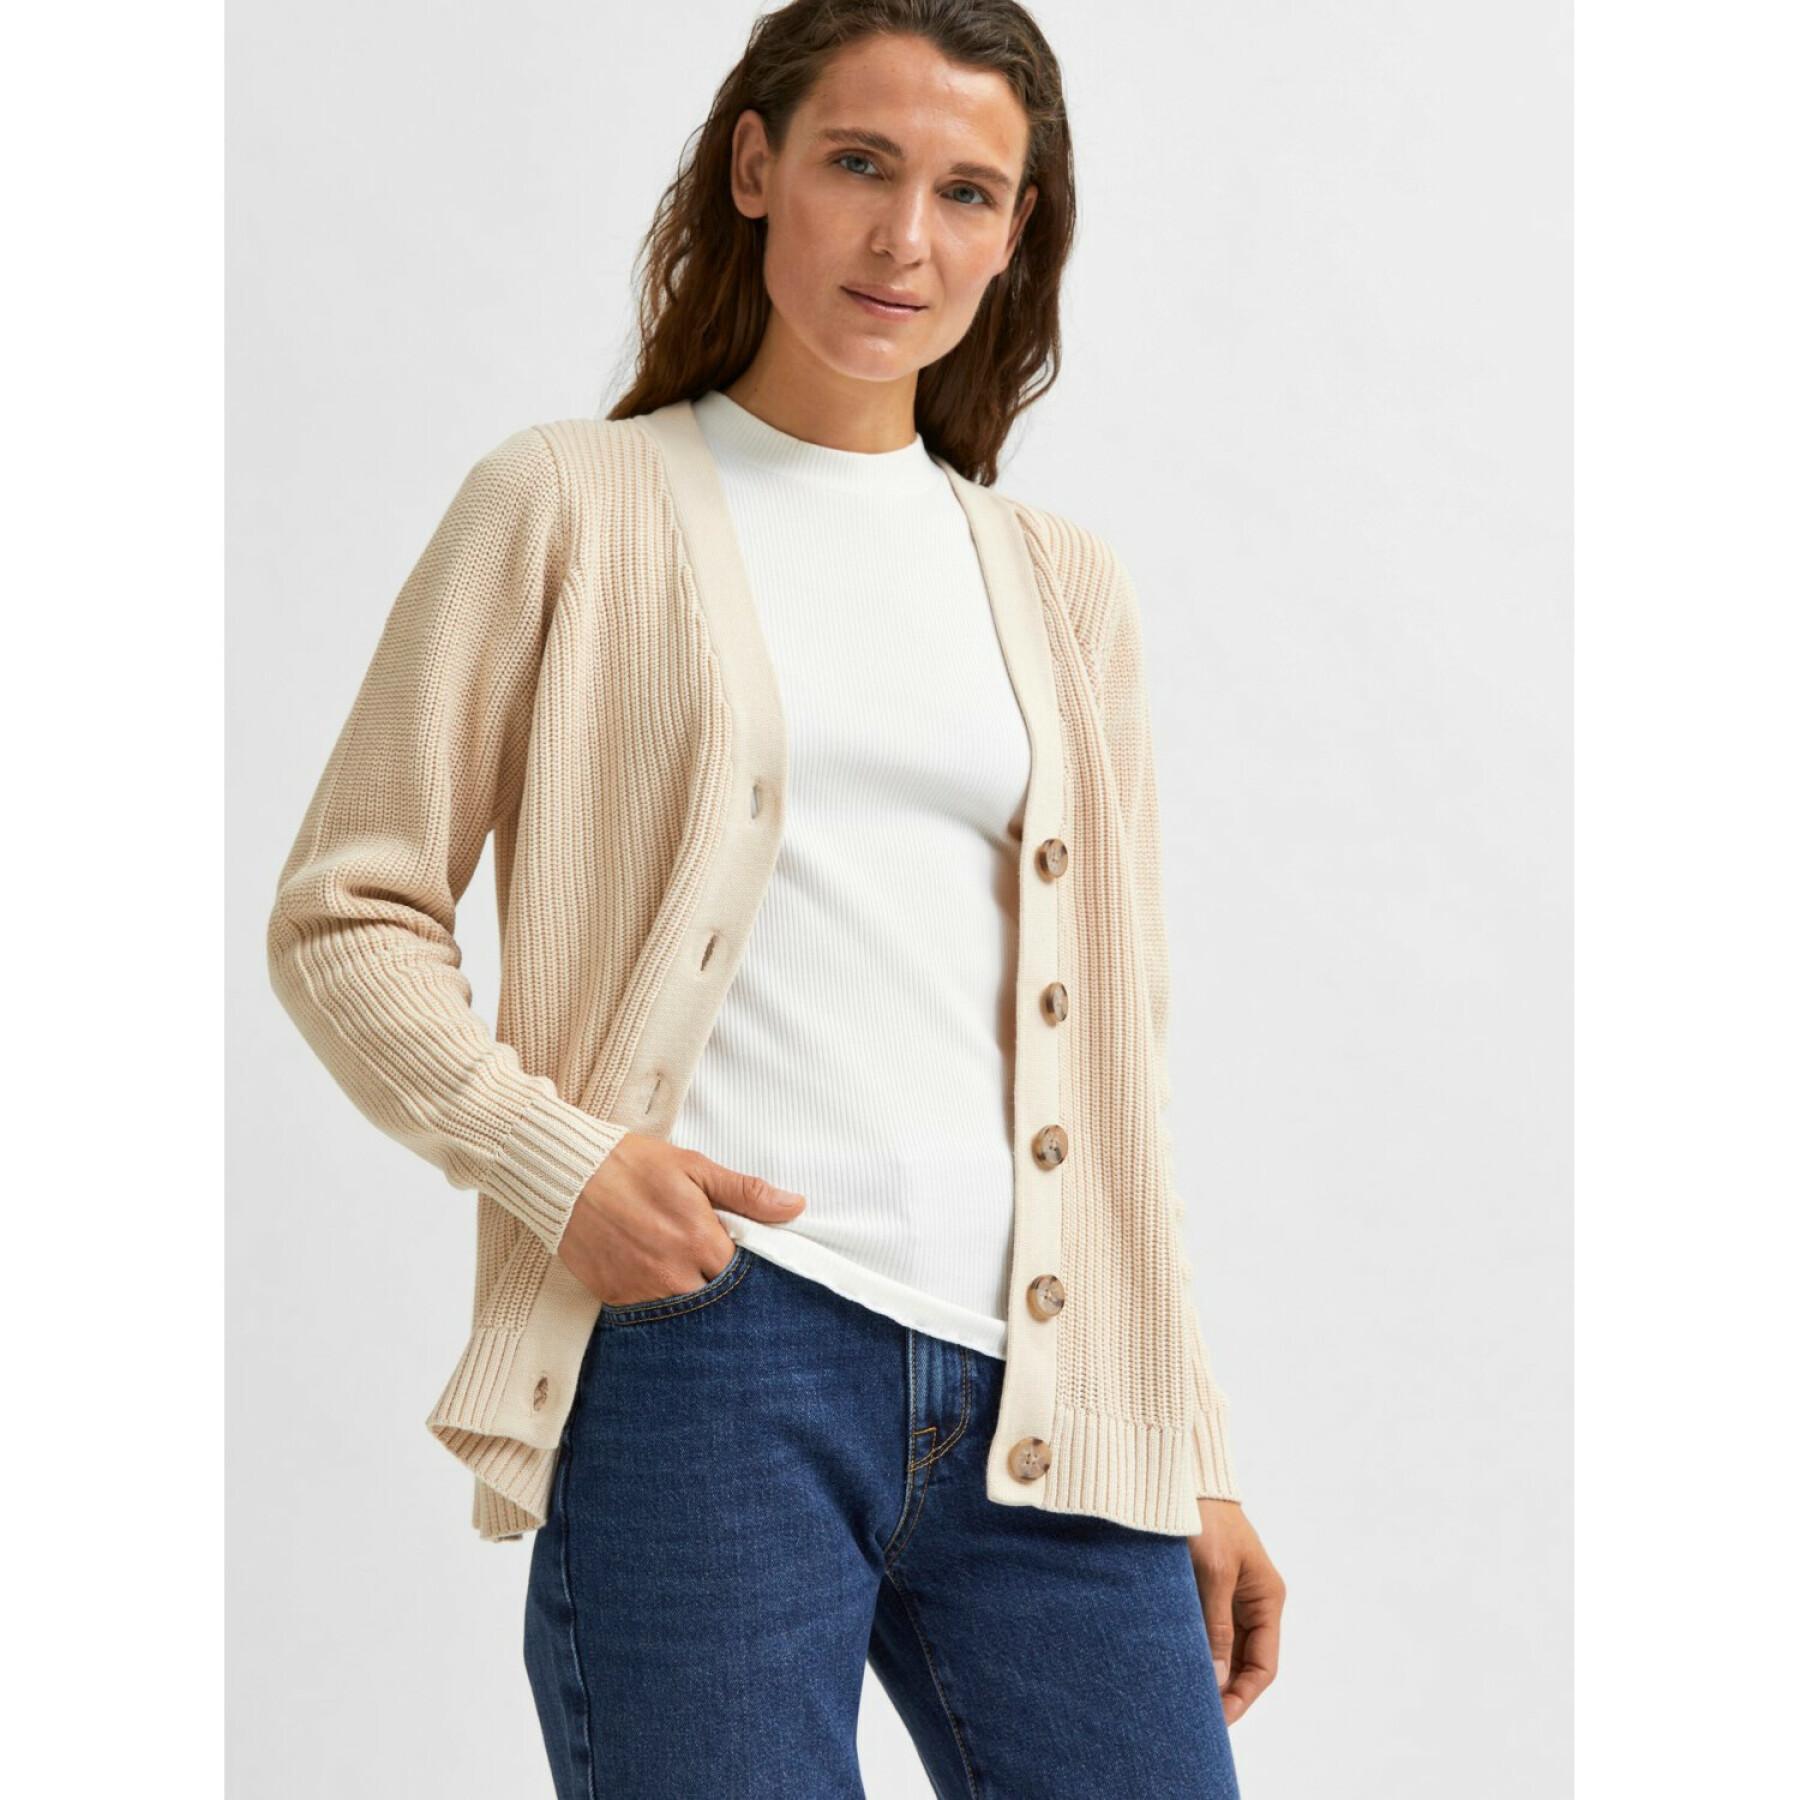 Cardigan femme Selected Emmy knit button